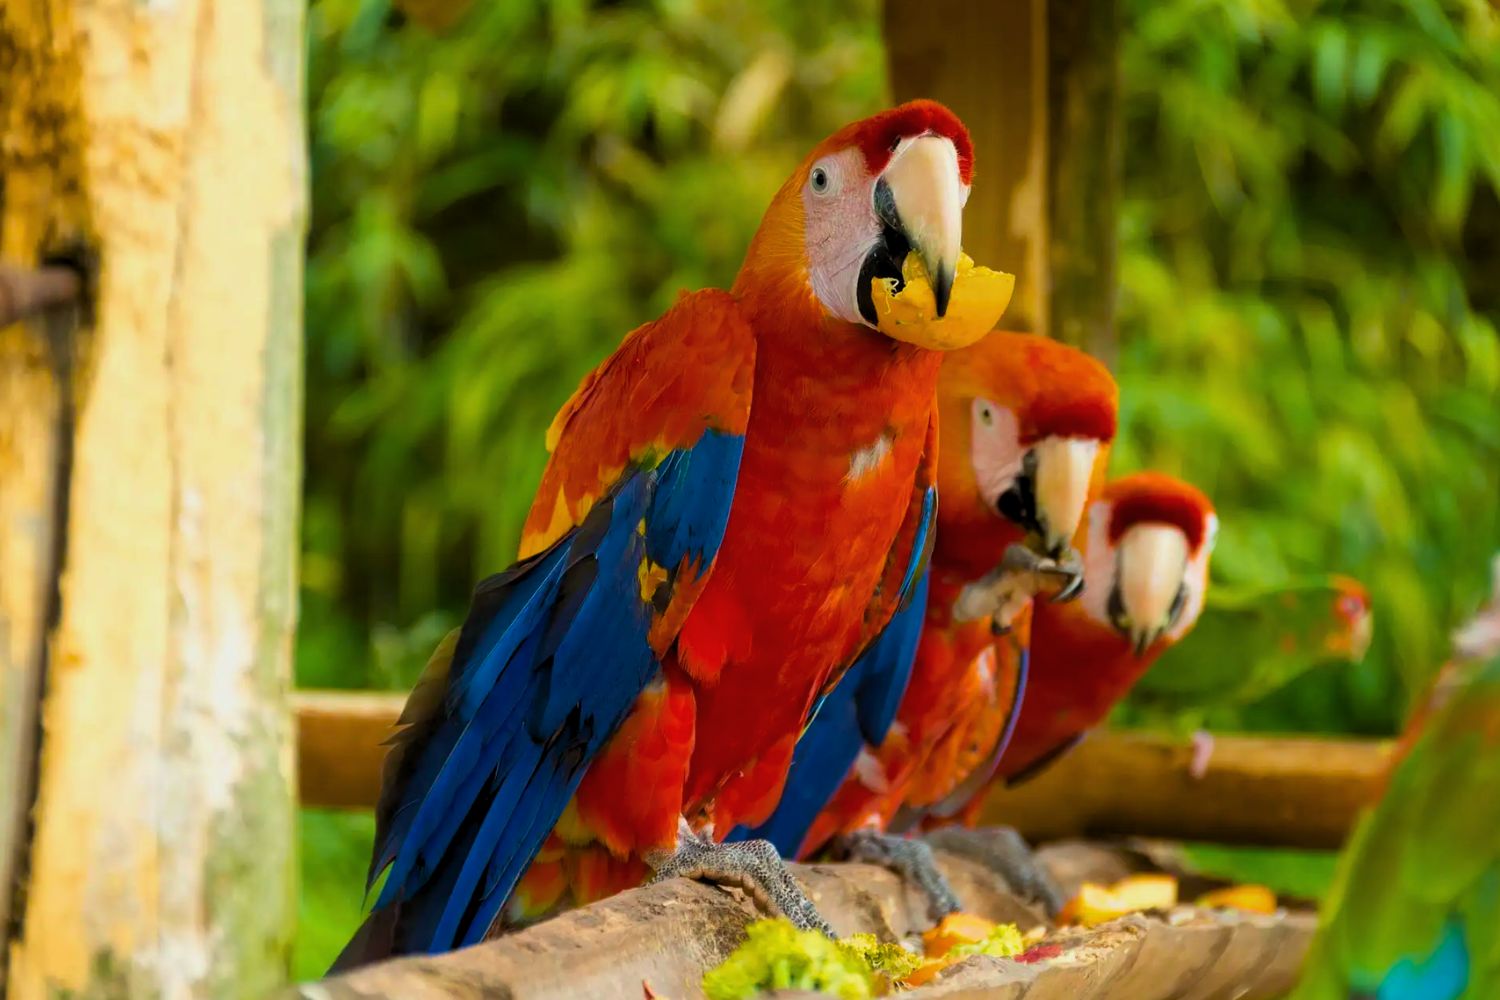 4. Macaws have a peculiar relationship with poison